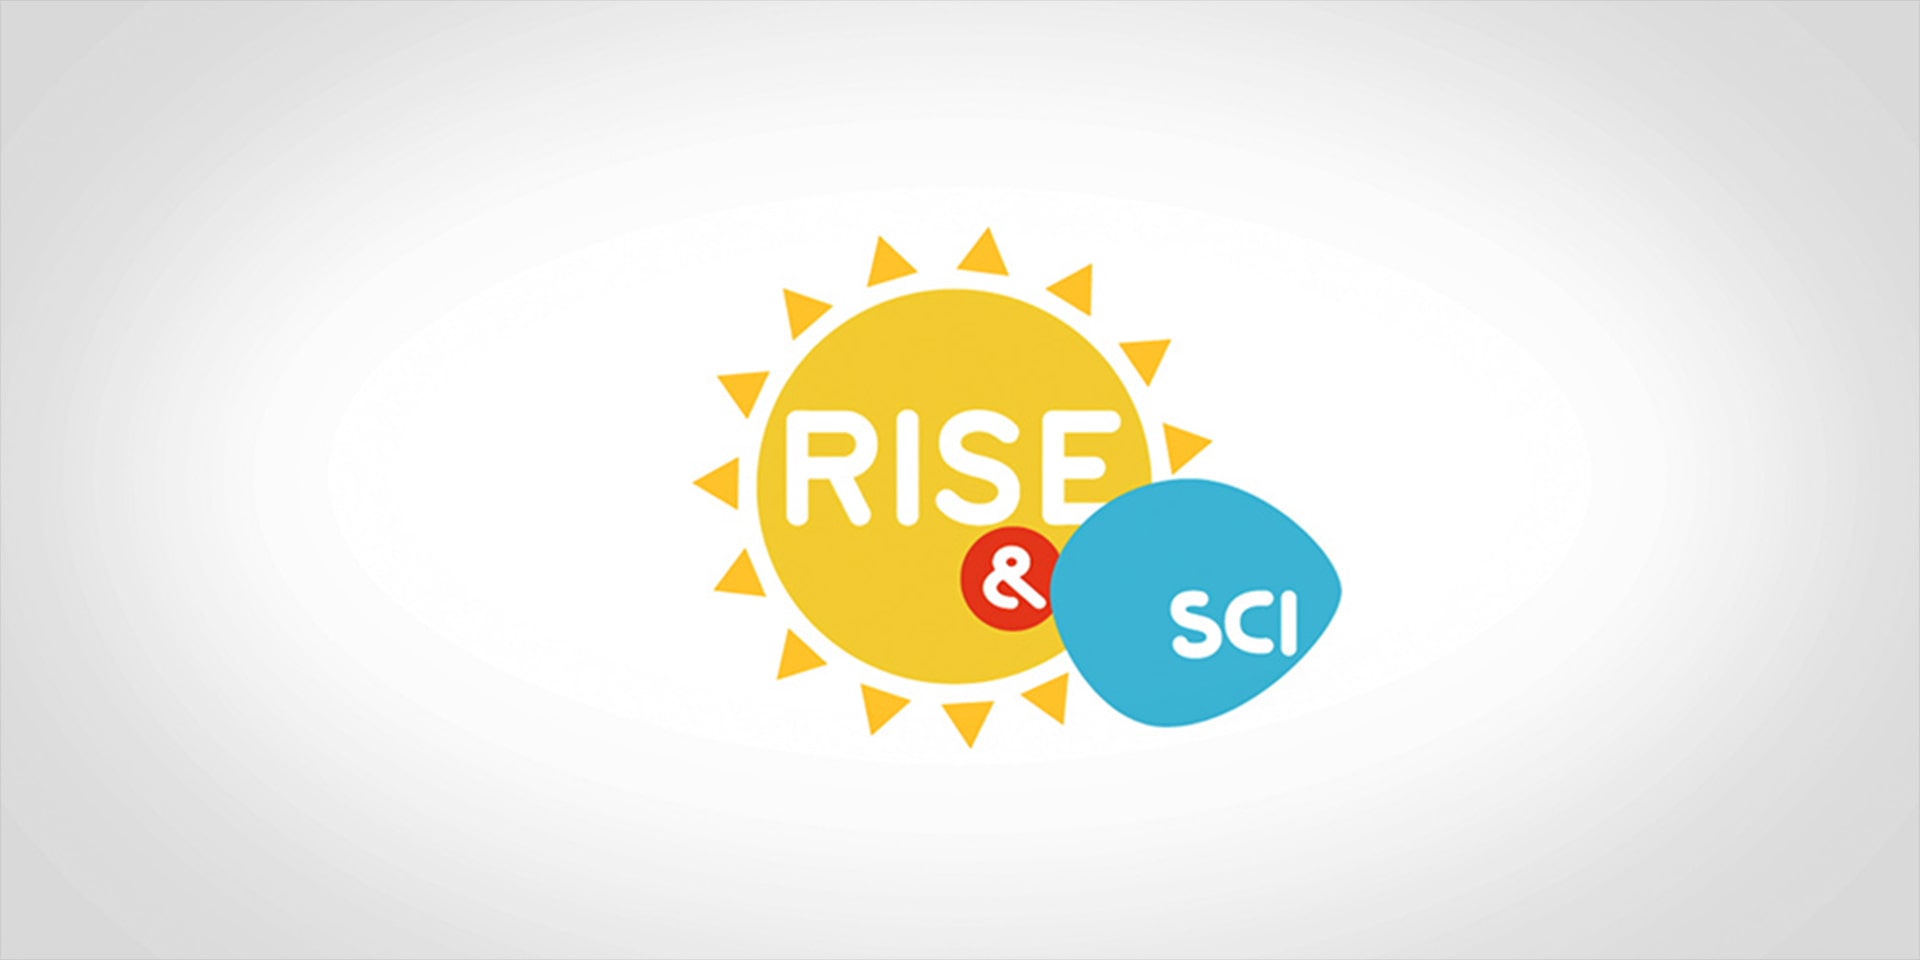 advertising discovery science channel rise e sci 01